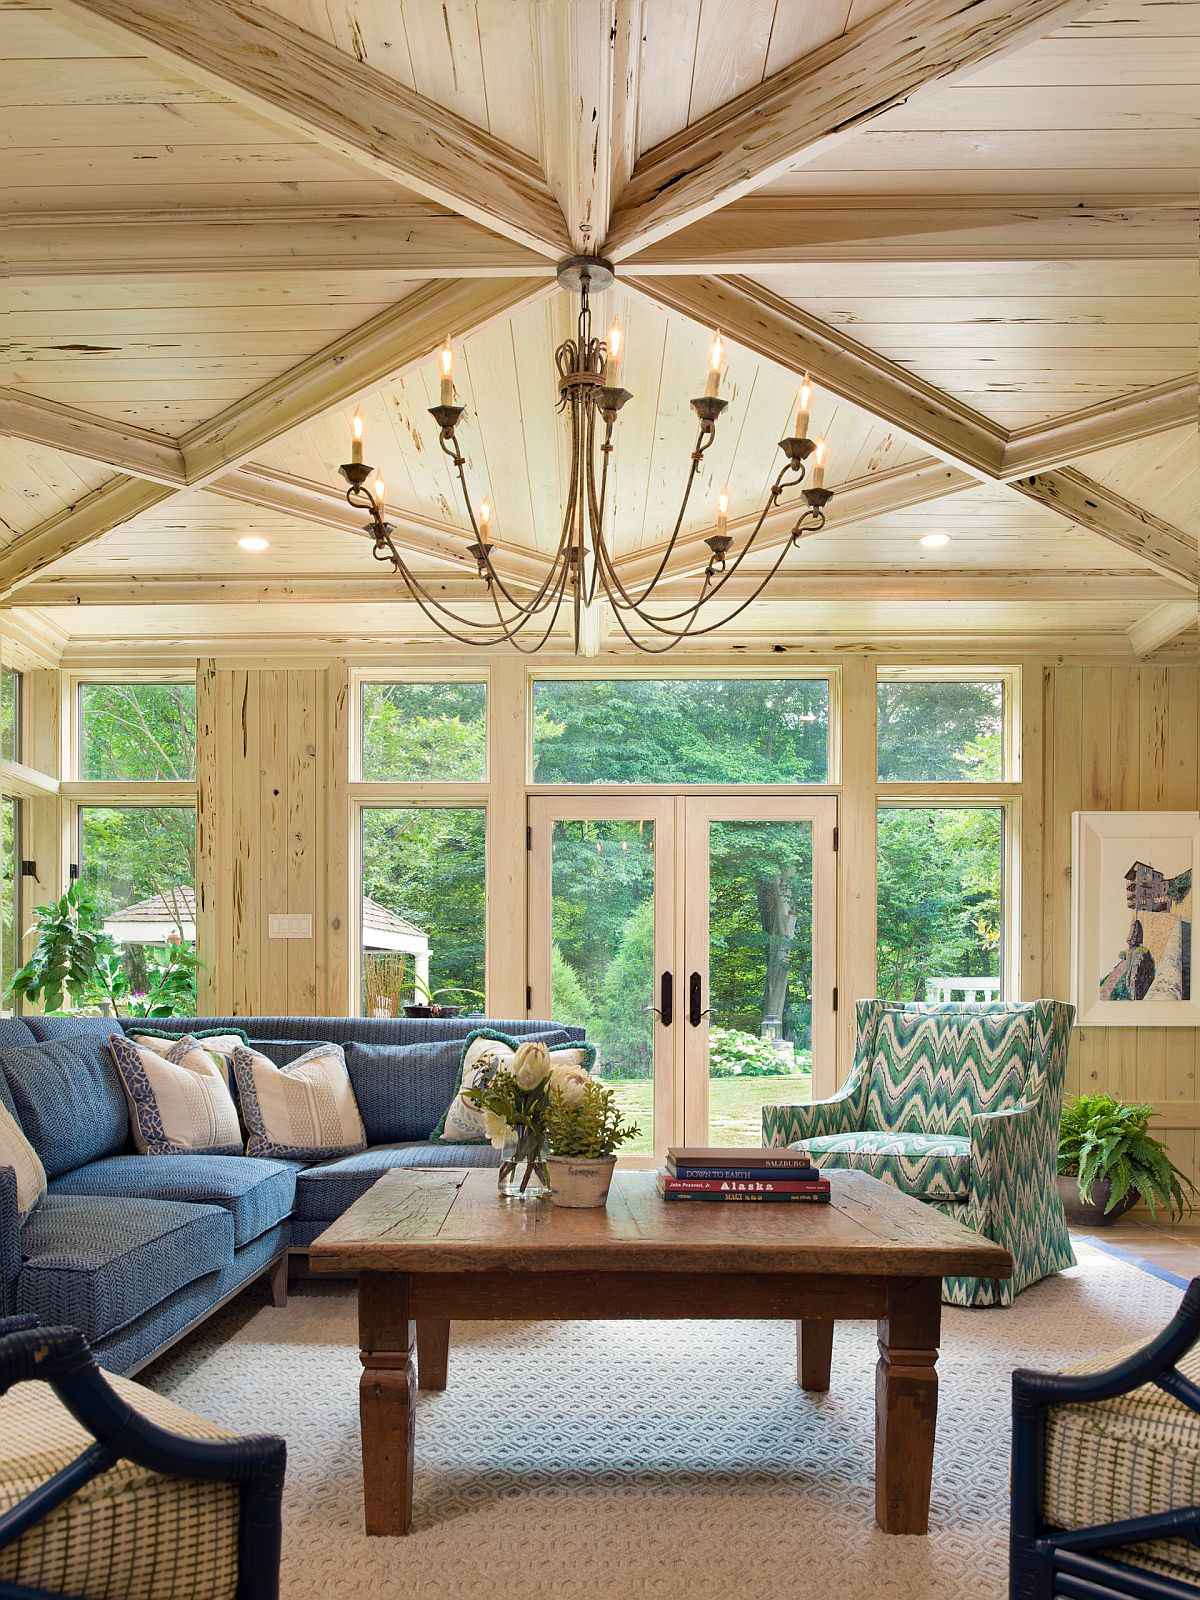 Dashing-traditional-sunroom-with-woodsy-walls-and-ceiling-where-the-sofa-brings-in-a-splash-of-blue-13157